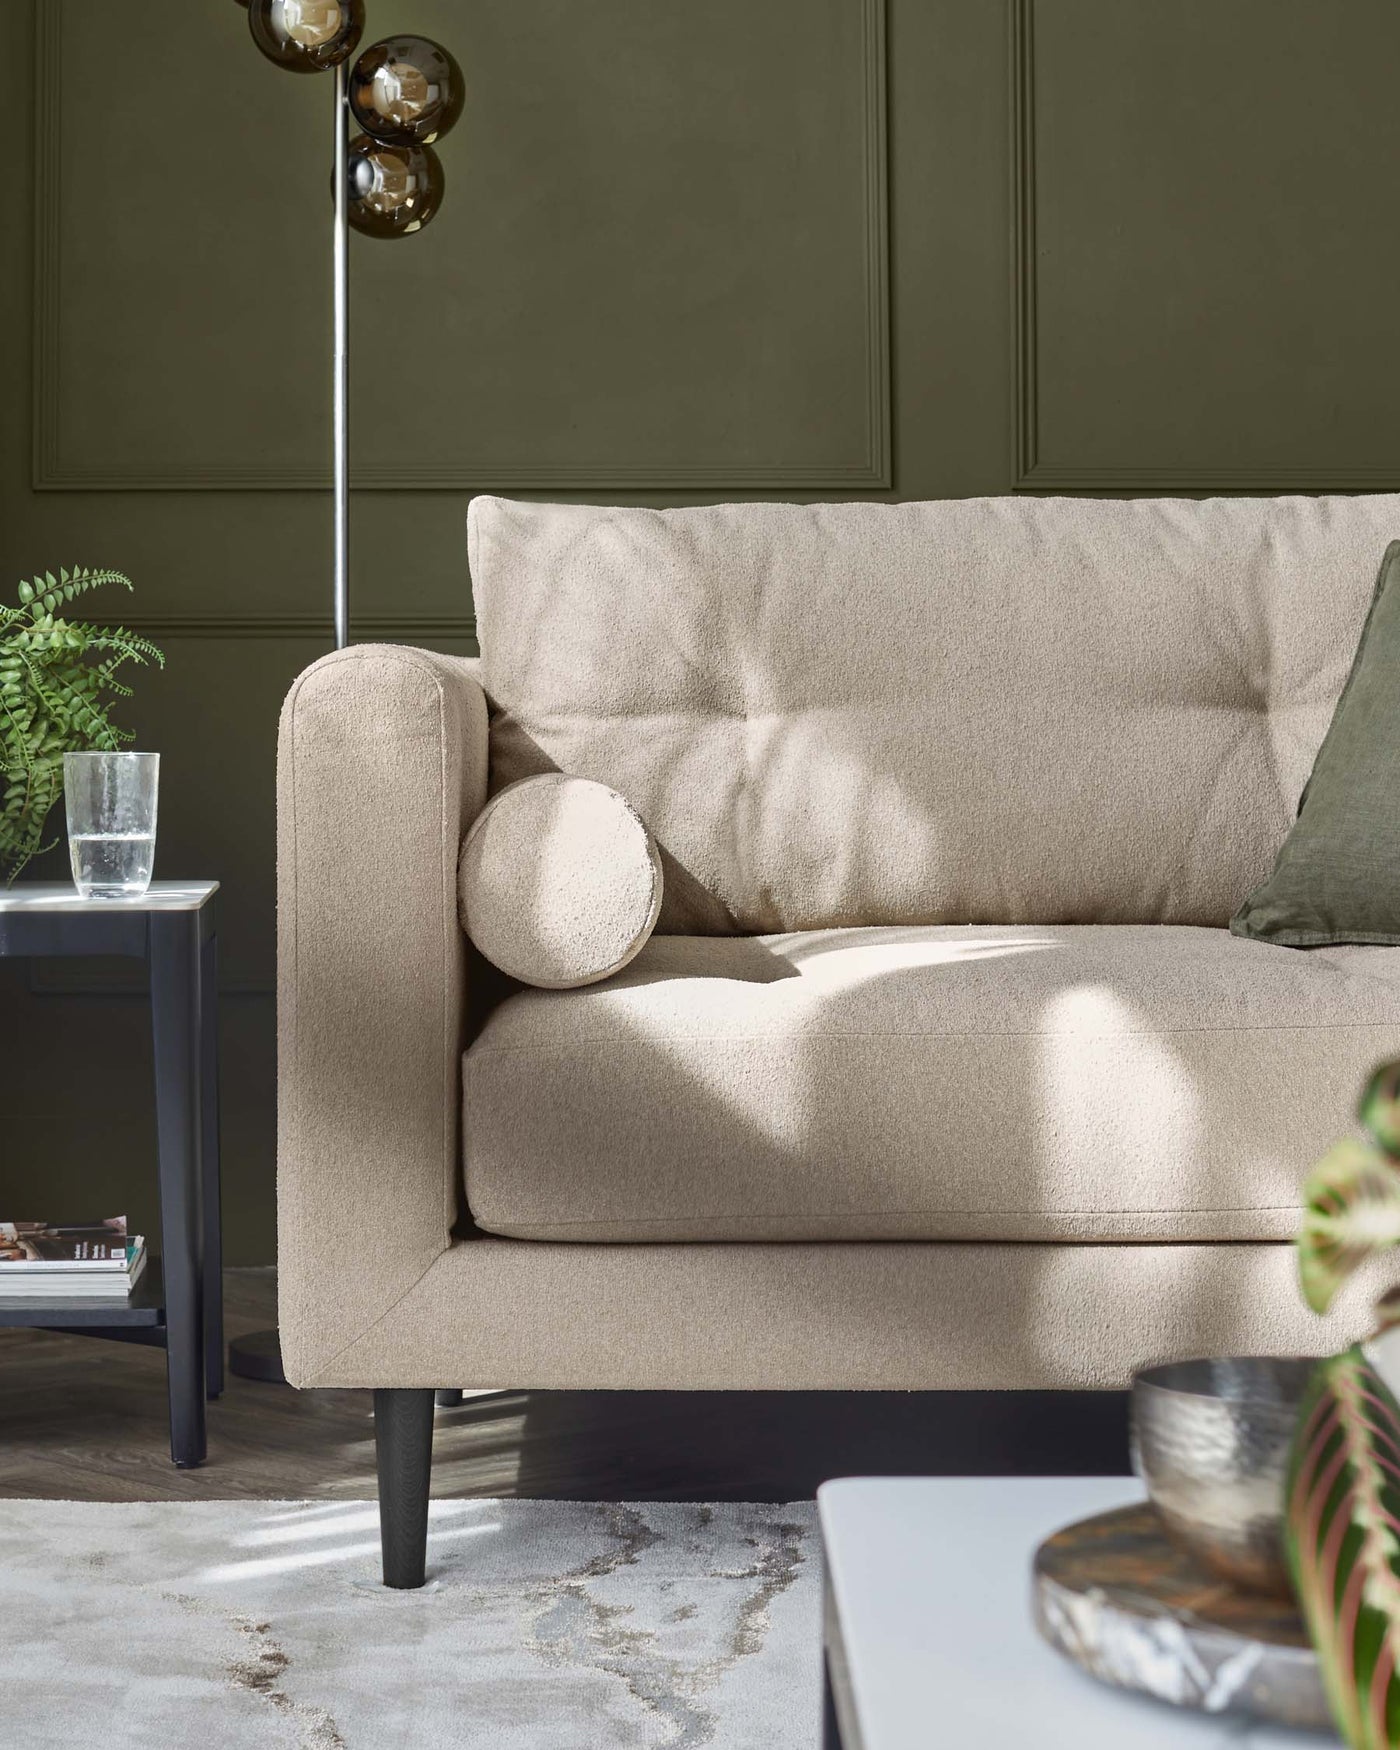 A chic beige fabric sofa with a clean, modern design, featuring cylindrical bolster pillows and minimalist black legs. Next to it is a sleek, black side table with a transparent vase and green foliage on top, complemented by a contemporary-style black coffee table with decorative bowls in the foreground.